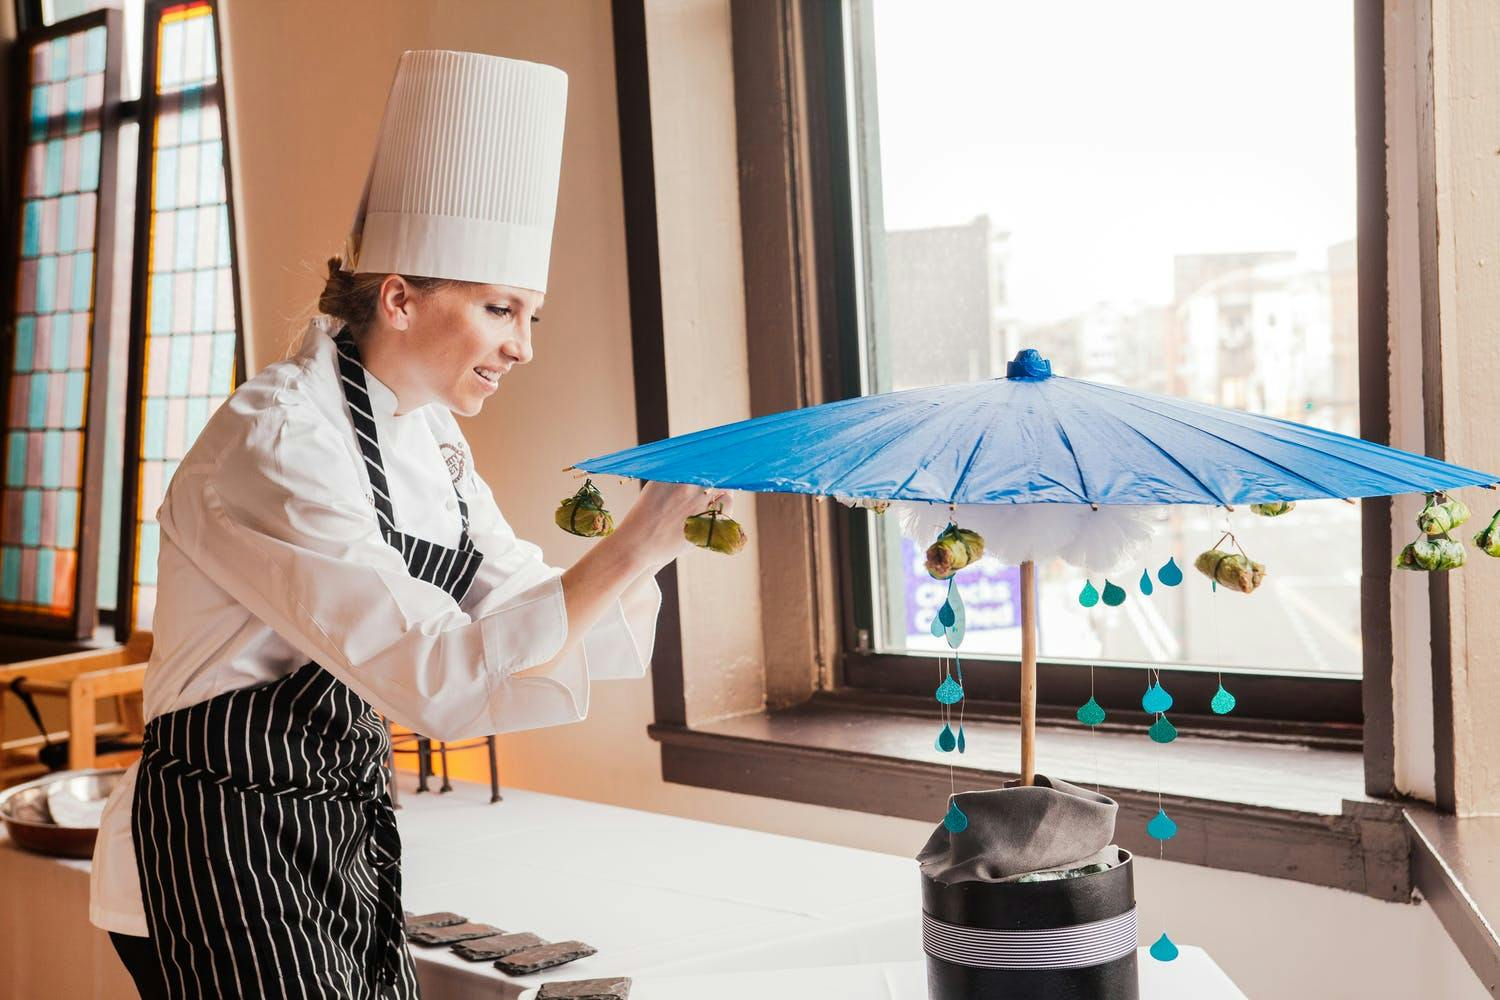 Chef With Umbrella-Structure Cotton Candy Machine | PartySlate